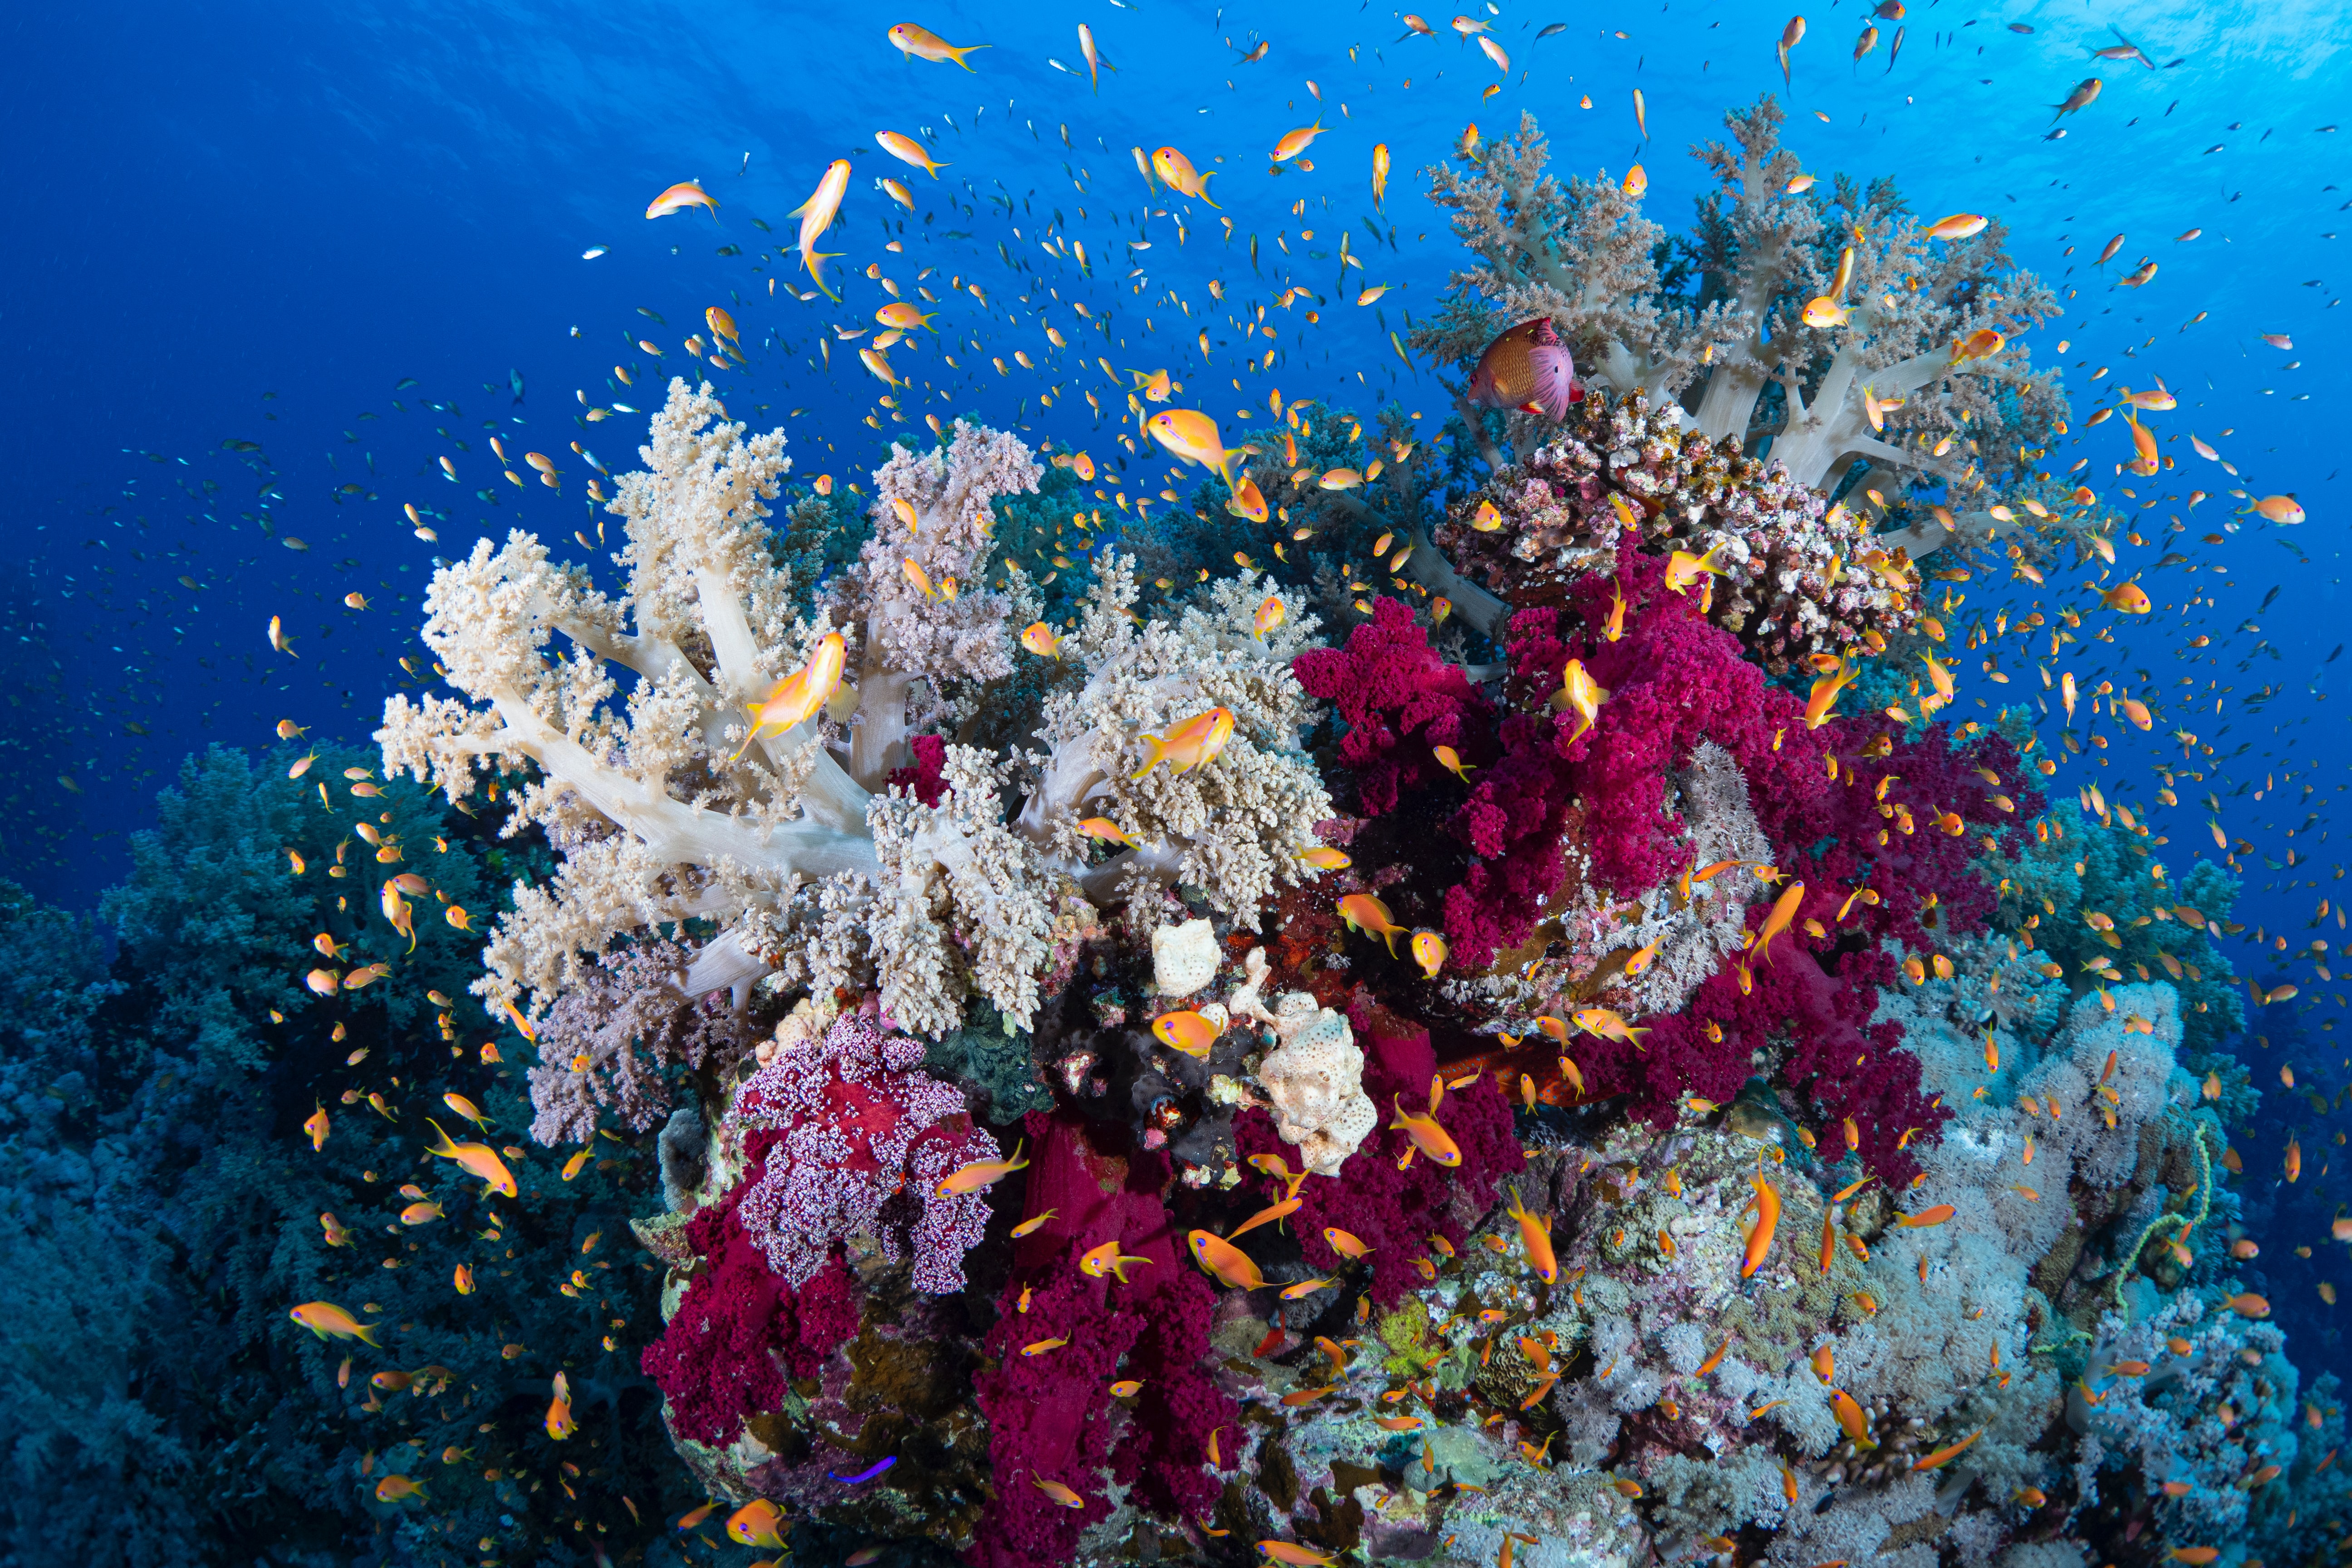 Colorful corals with fishes swimming around